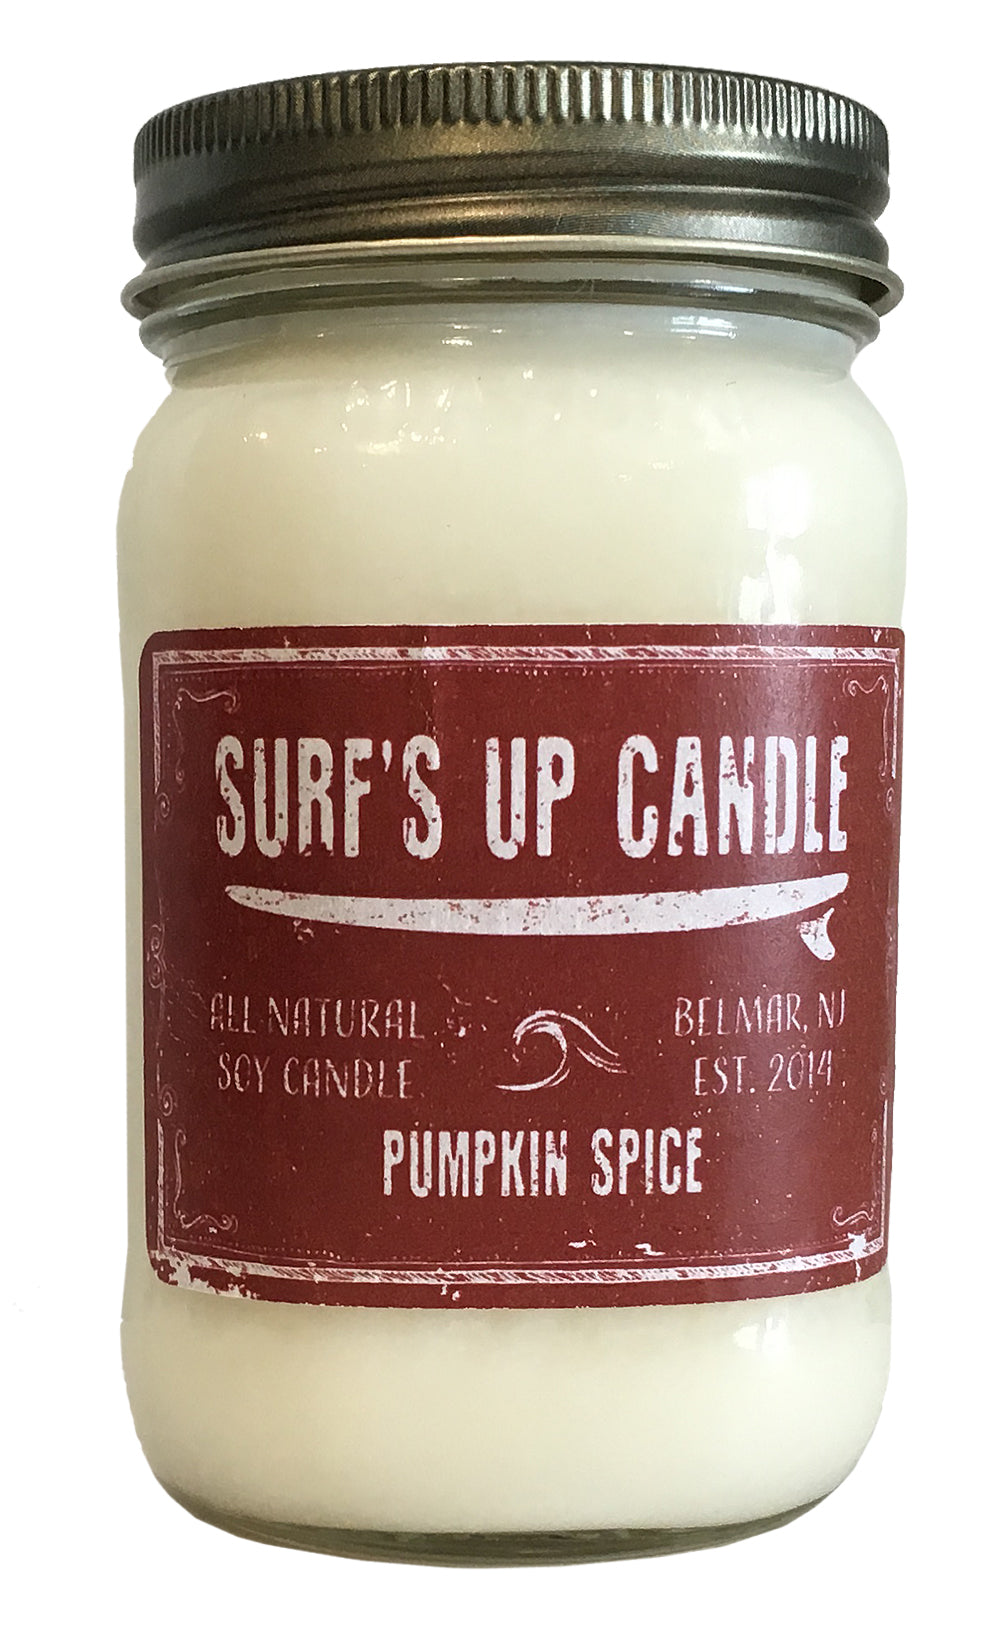 surfs up candle pumpkin spice soy candle